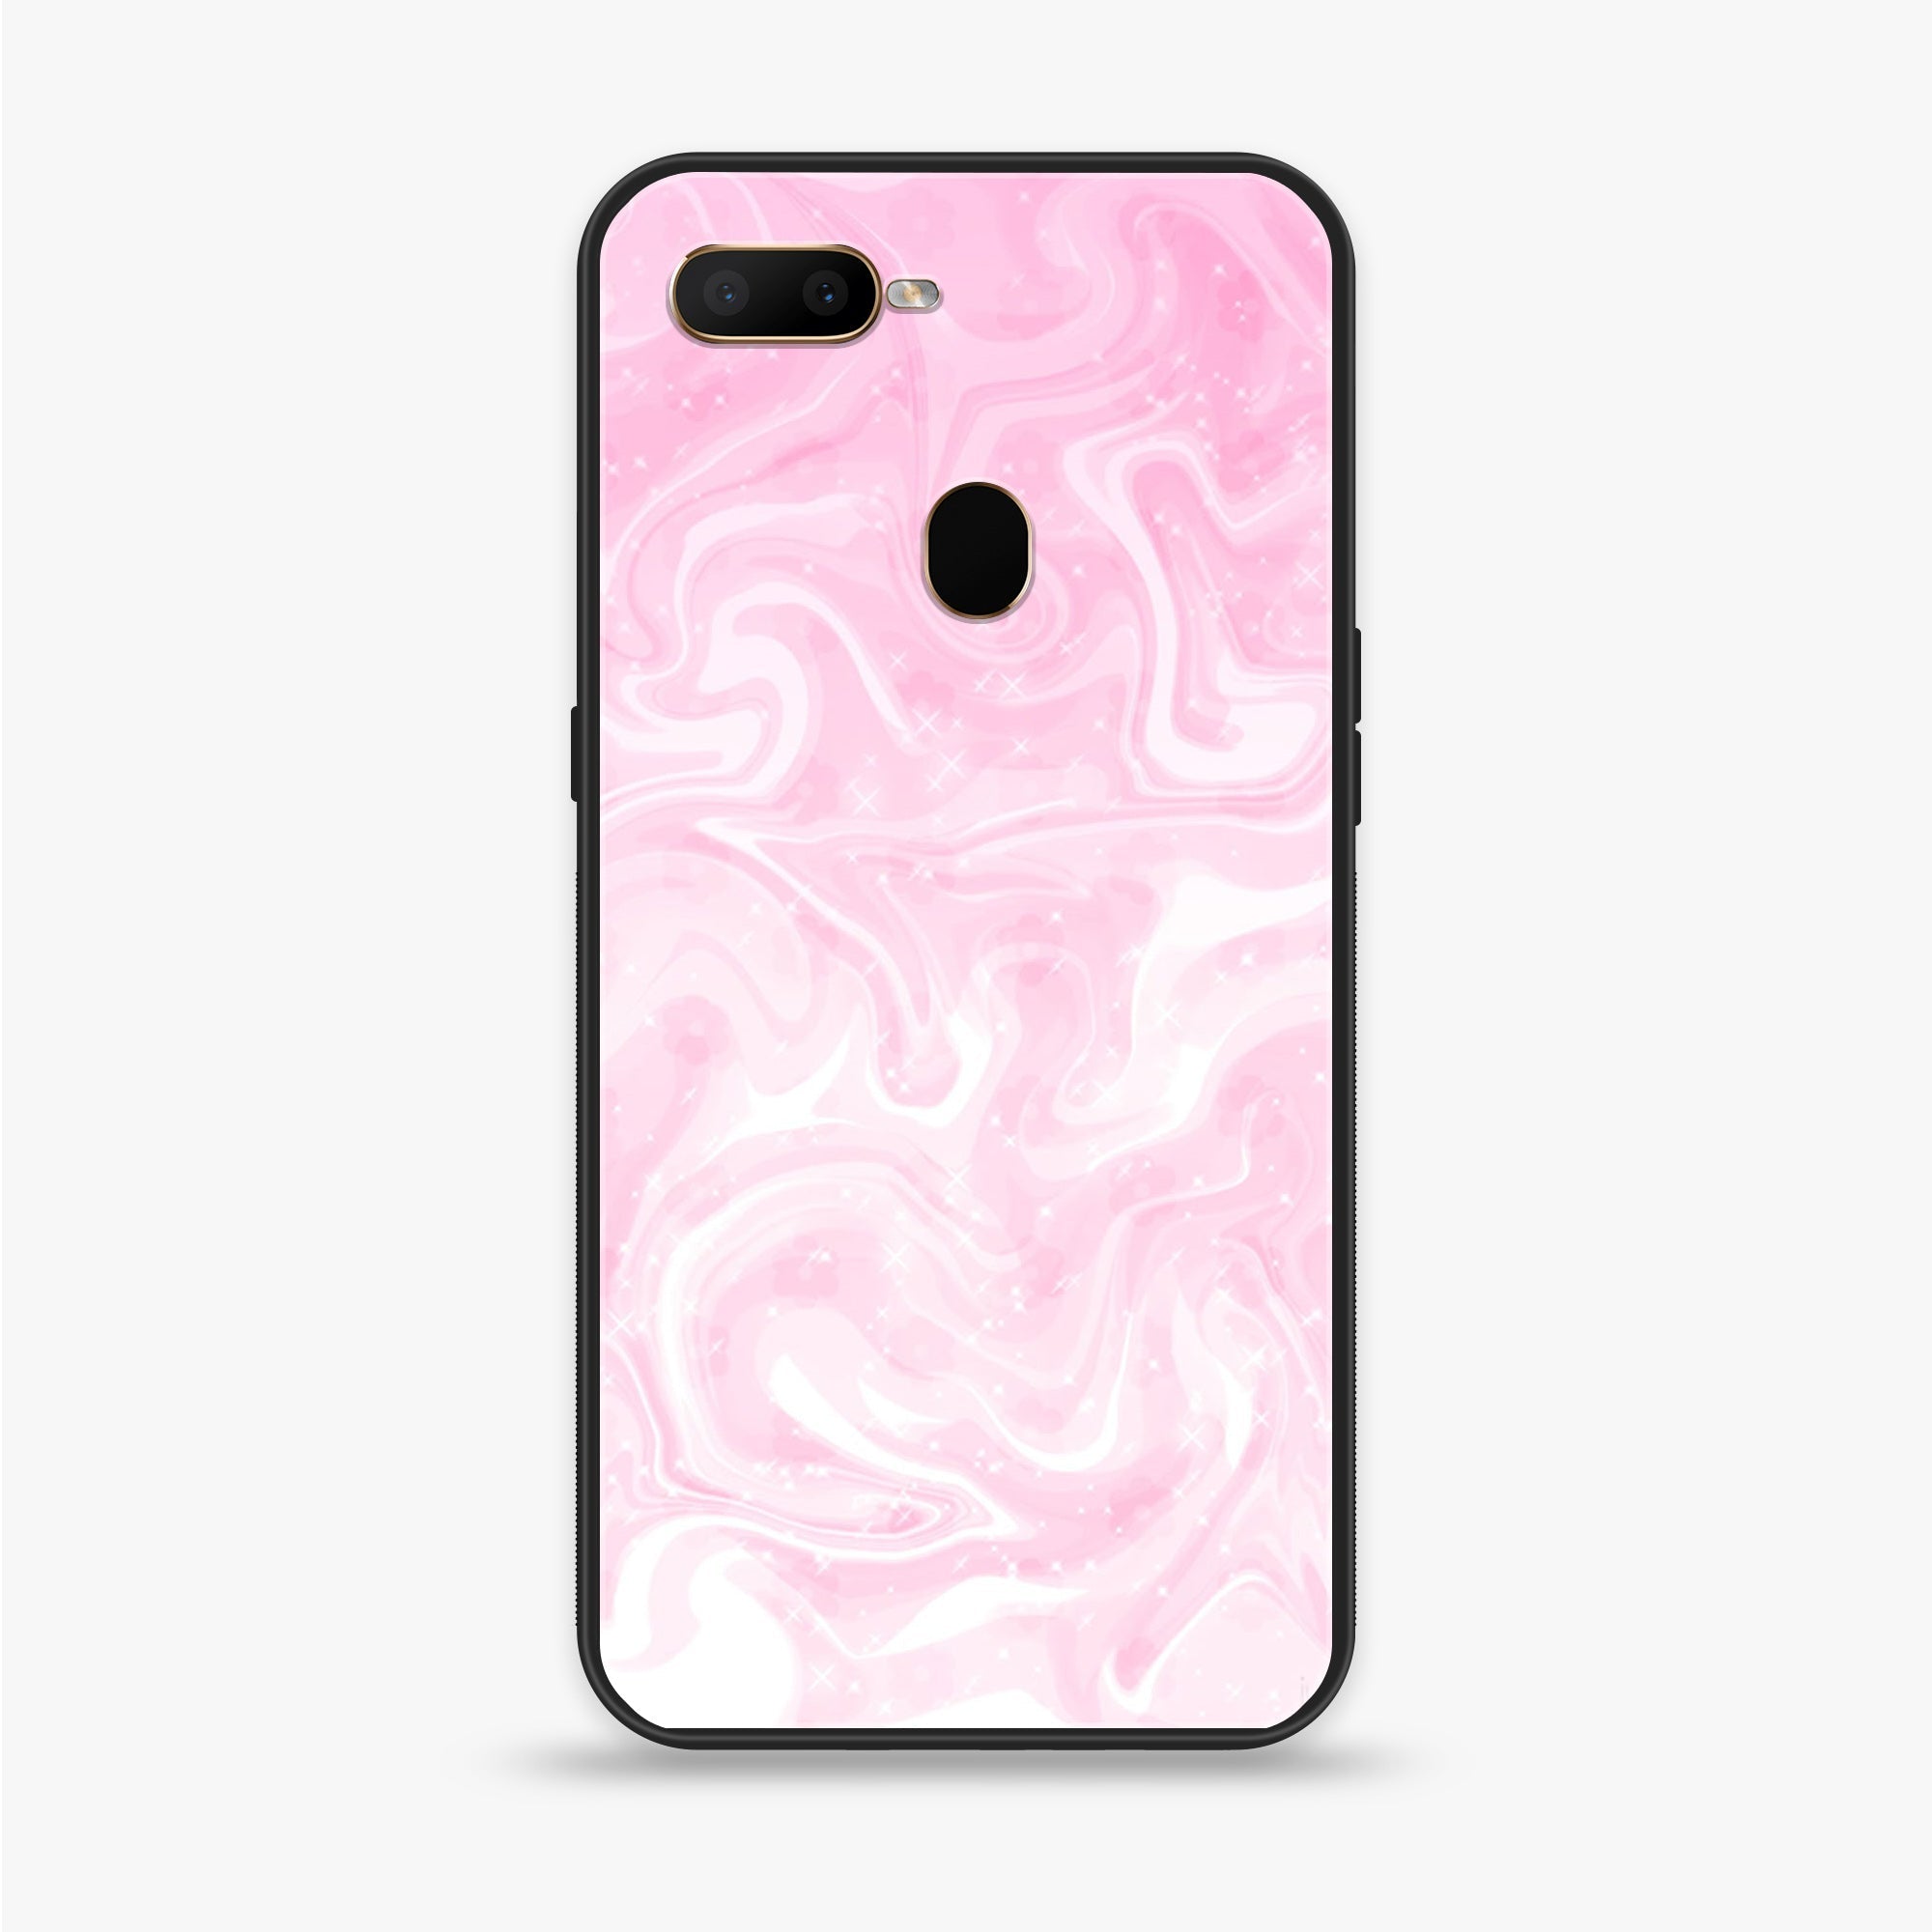 Oppo A7 - Pink Marble Series - Premium Printed Glass soft Bumper shock Proof Case